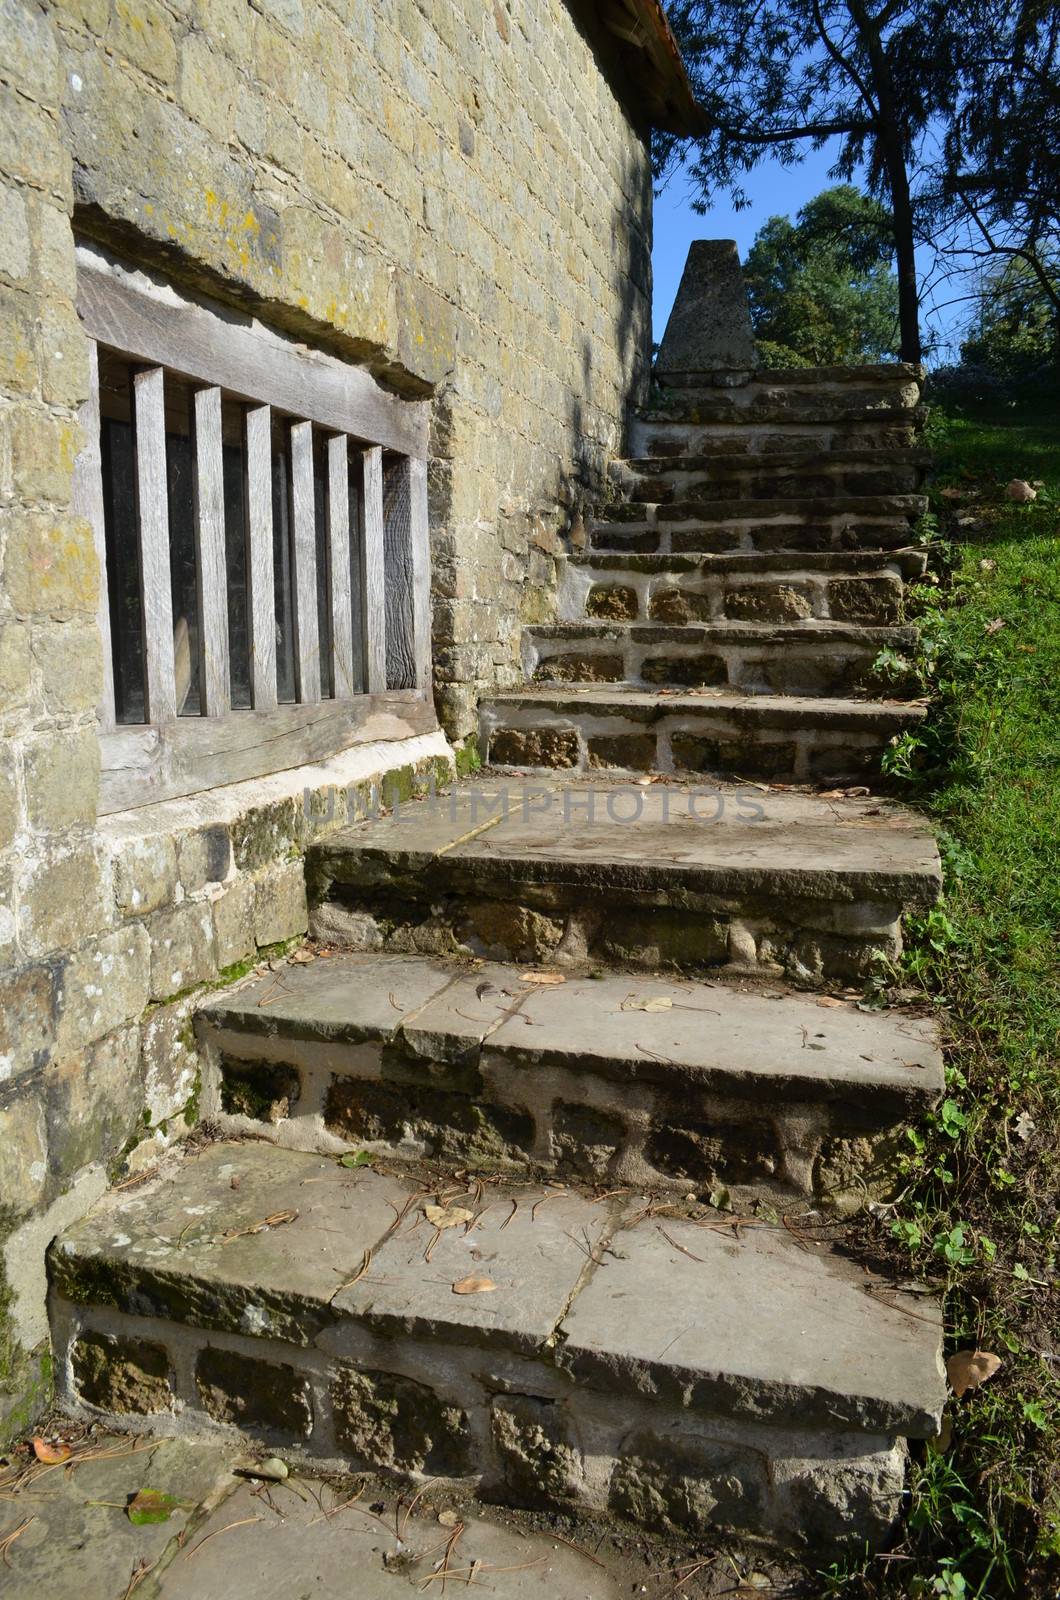 Large light coloured stone slab steps on the exterior of a building.